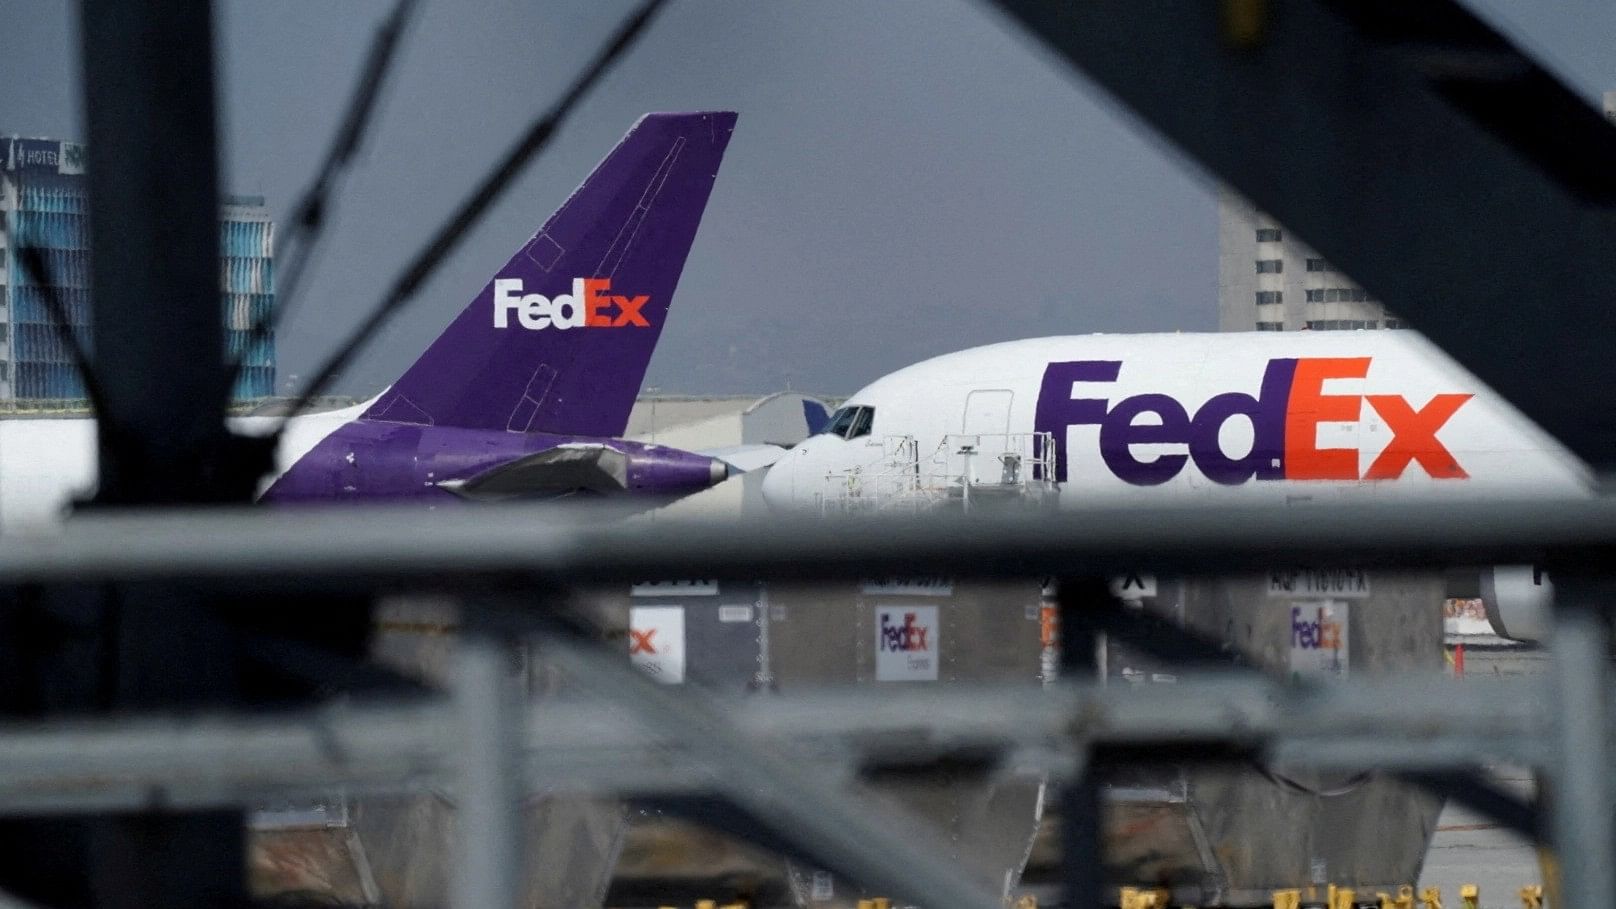 <div class="paragraphs"><p>FedEx air freight cargo planes parked at a FedEx regional hub at Los Angeles International Airport.</p></div>